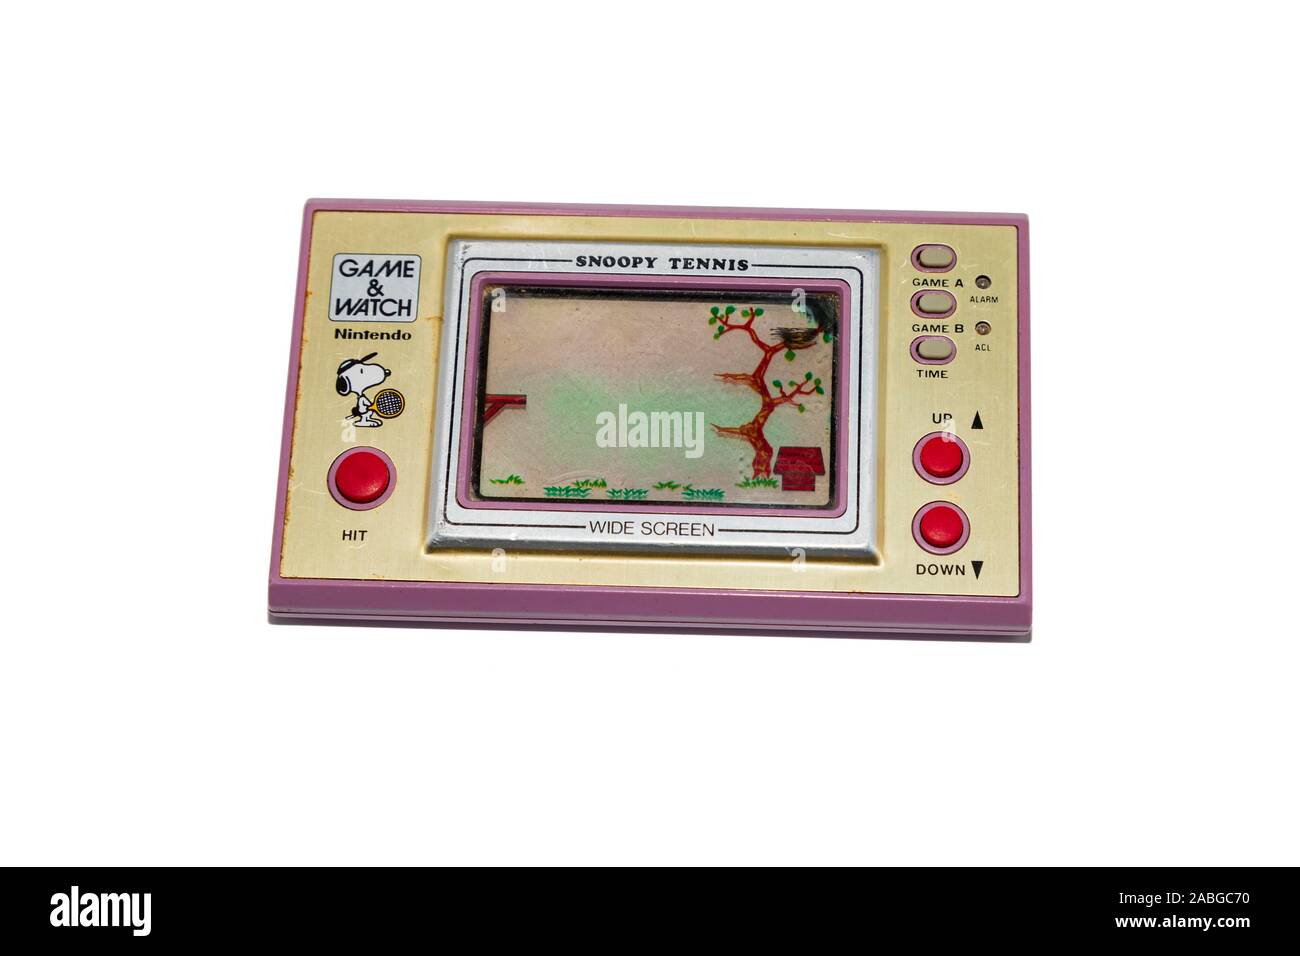 Antique Nintendo Game and Watch Snoopy Tennis handheld game from the 1980's  Stock Photo - Alamy